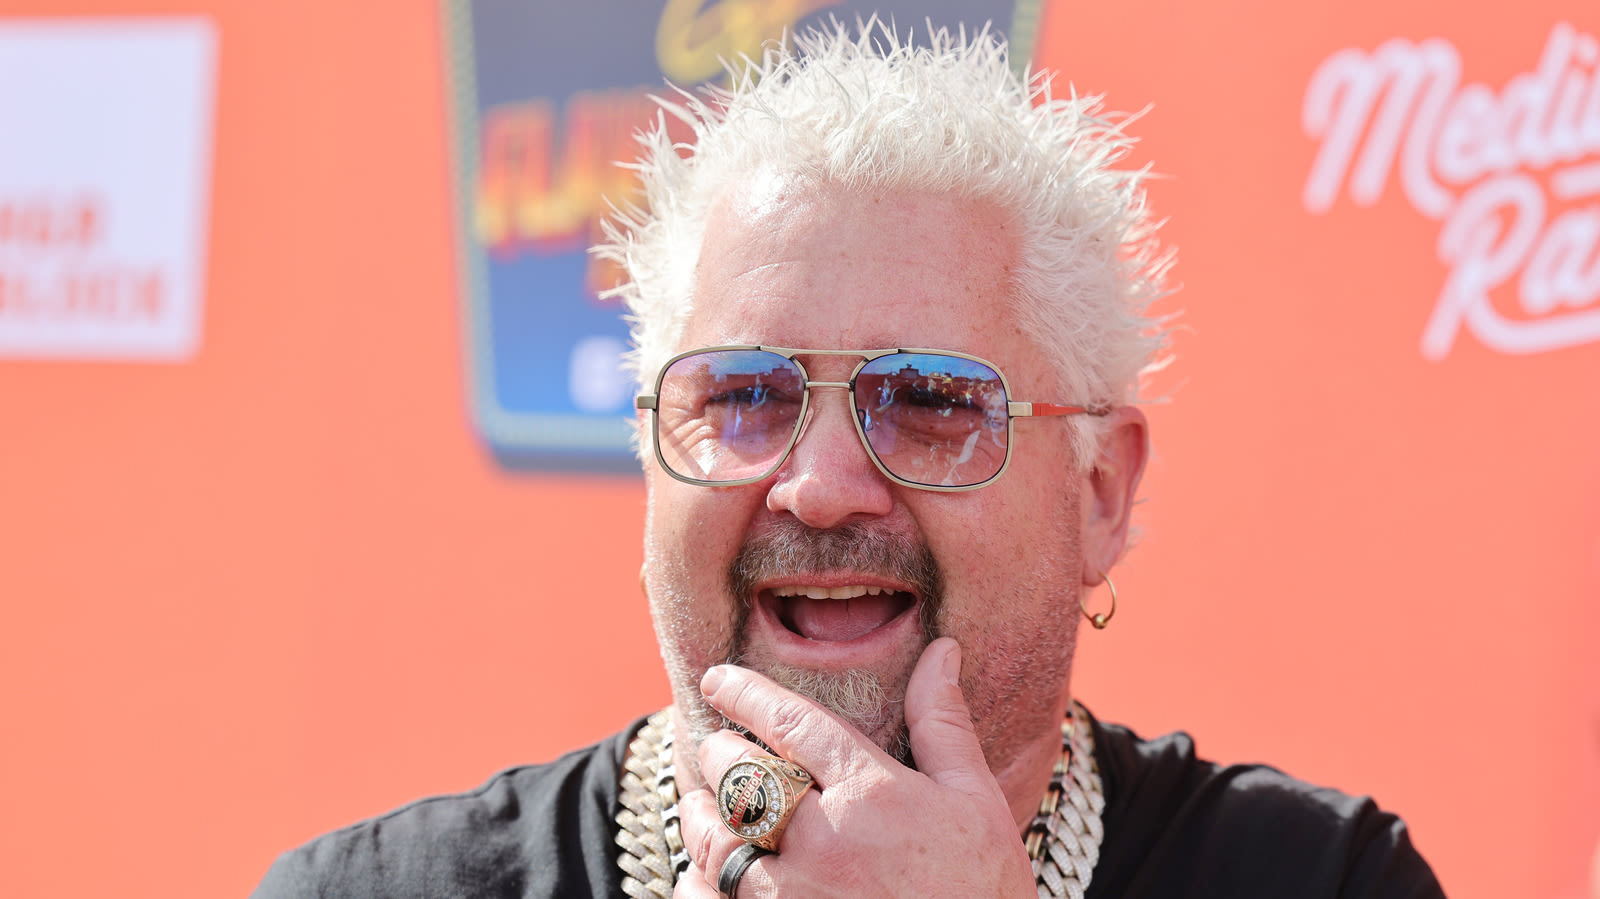 12 Biggest Foods Guy Fieri Has Ever Eaten On Diners, Drive-Ins And Dives